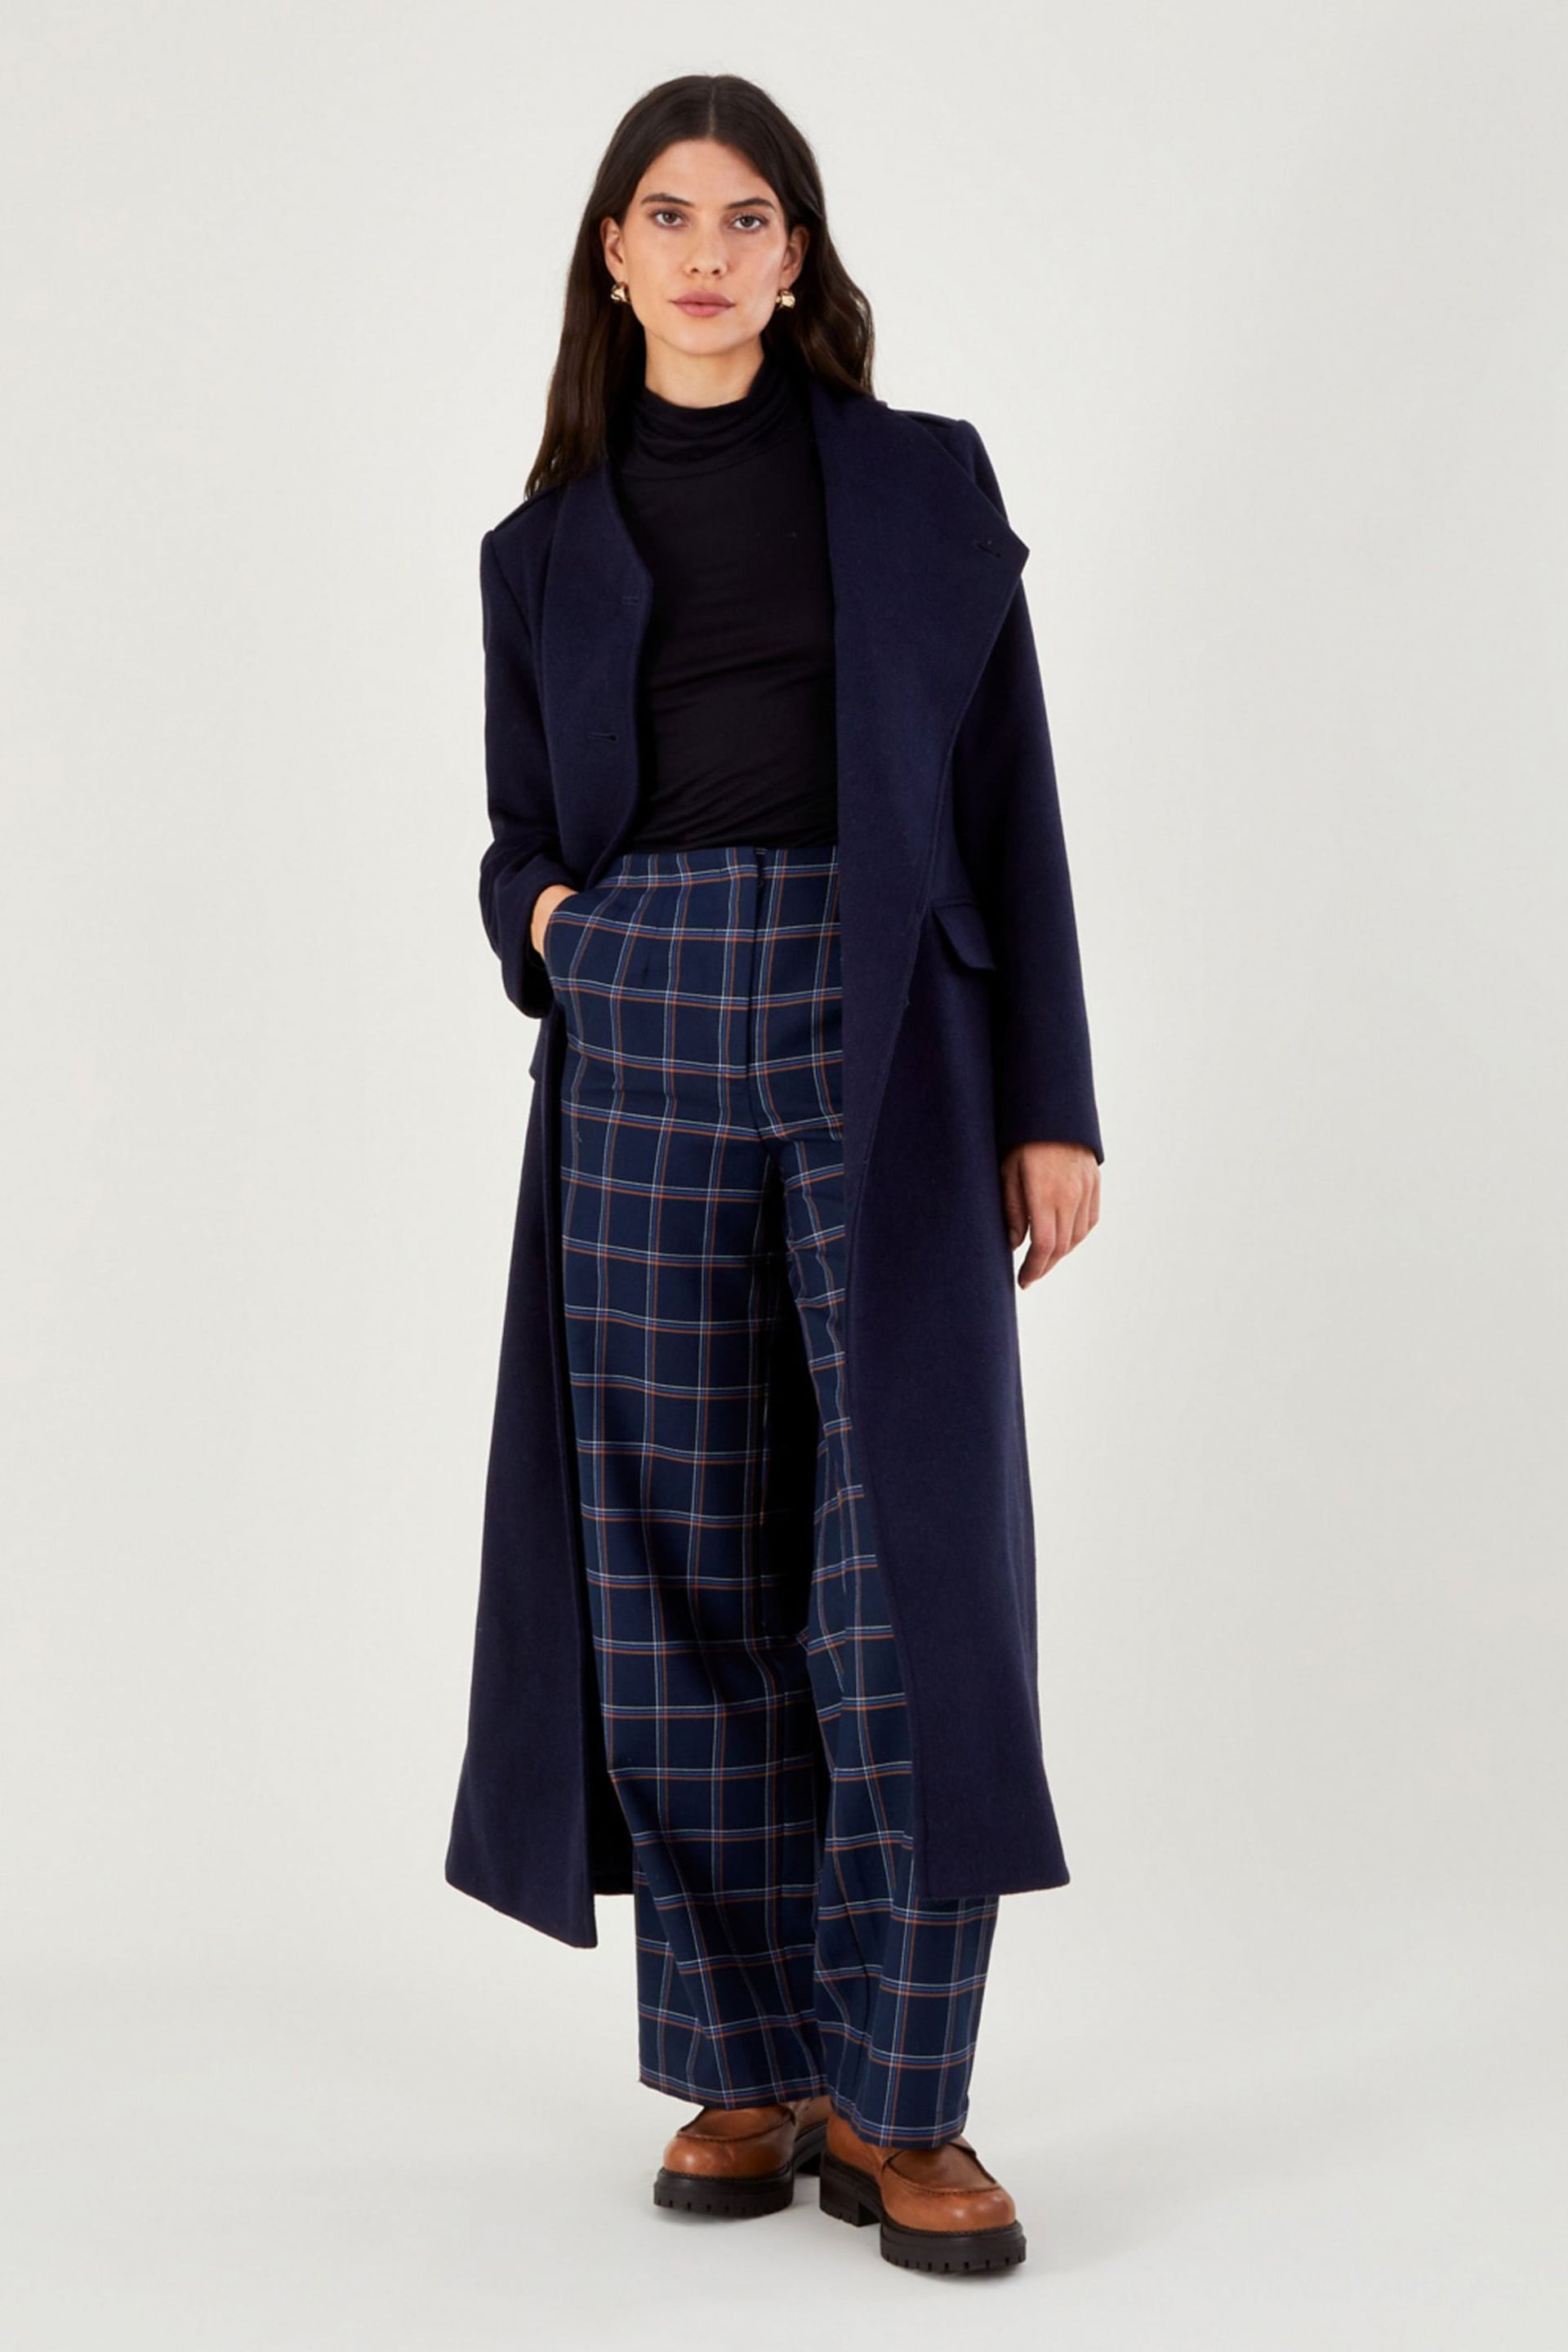 Monsoon Vanessa Skirted Coat In Wool Mix - Image 1 of 5